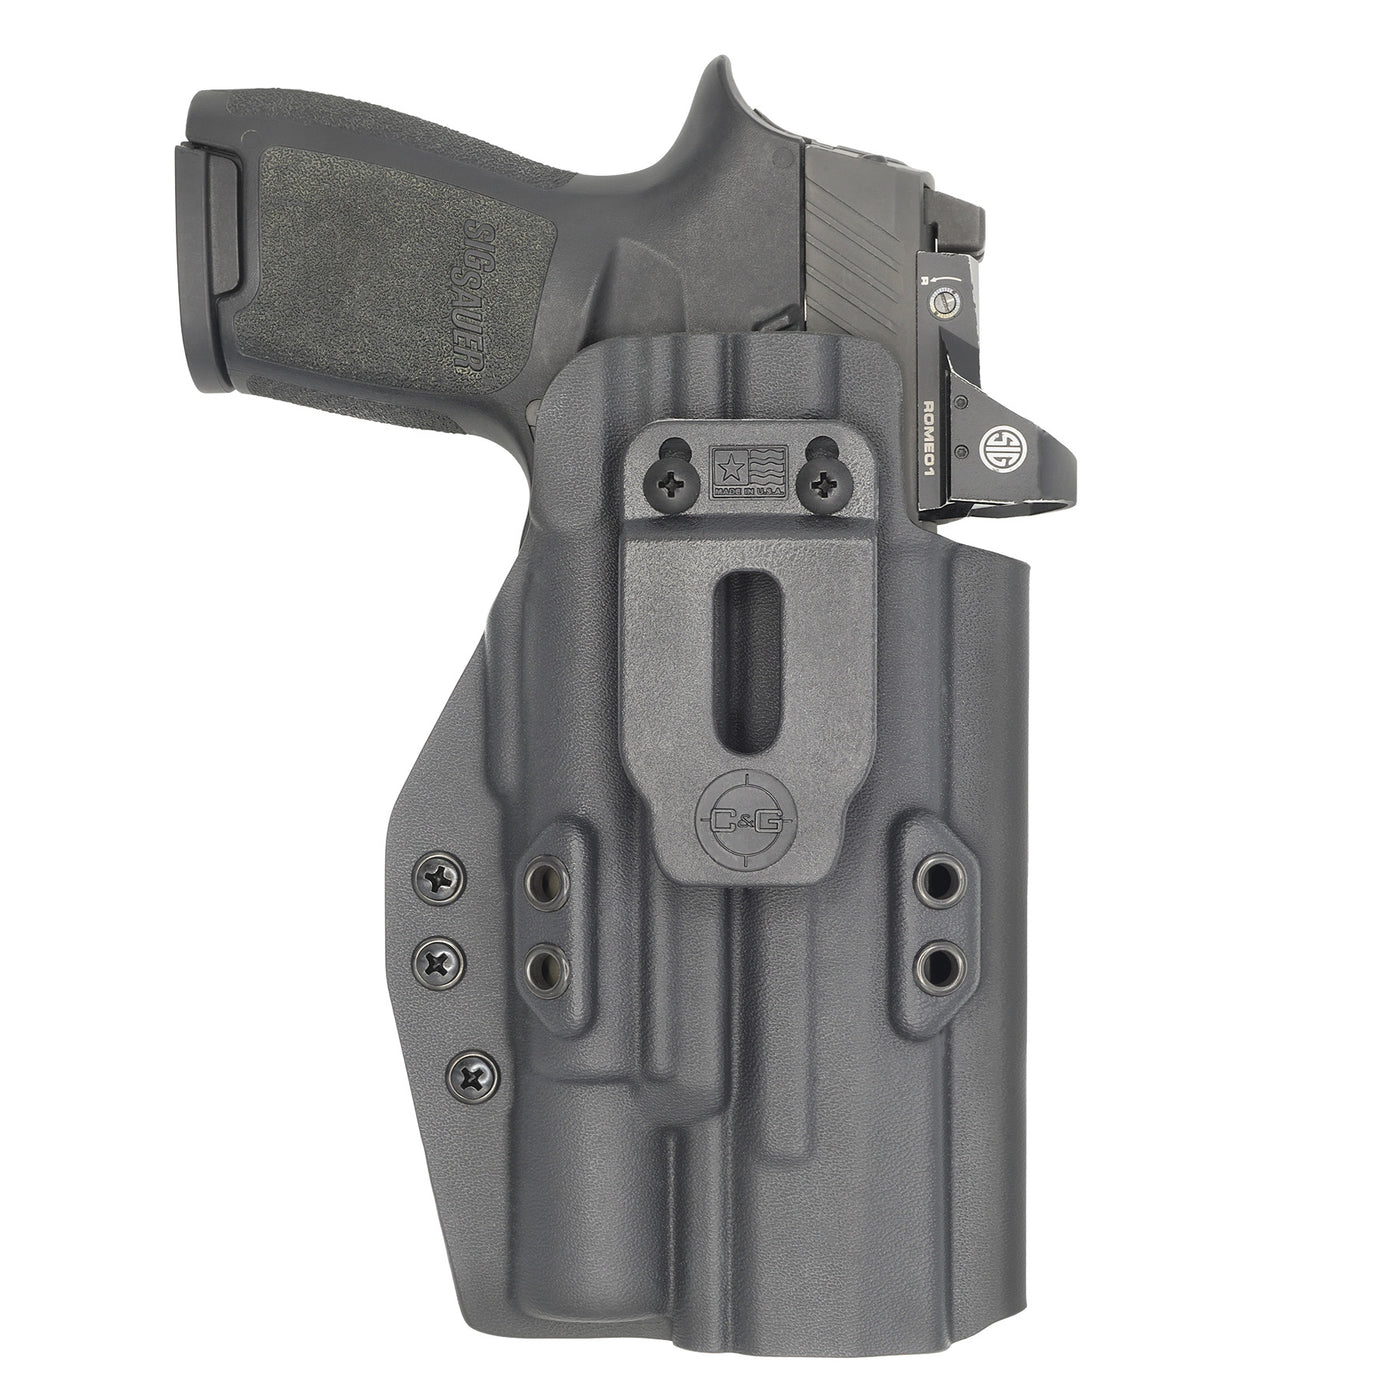 C&G Holsters Quickship IWB Tactical H&K 45/c Surefire X300 in holstered position